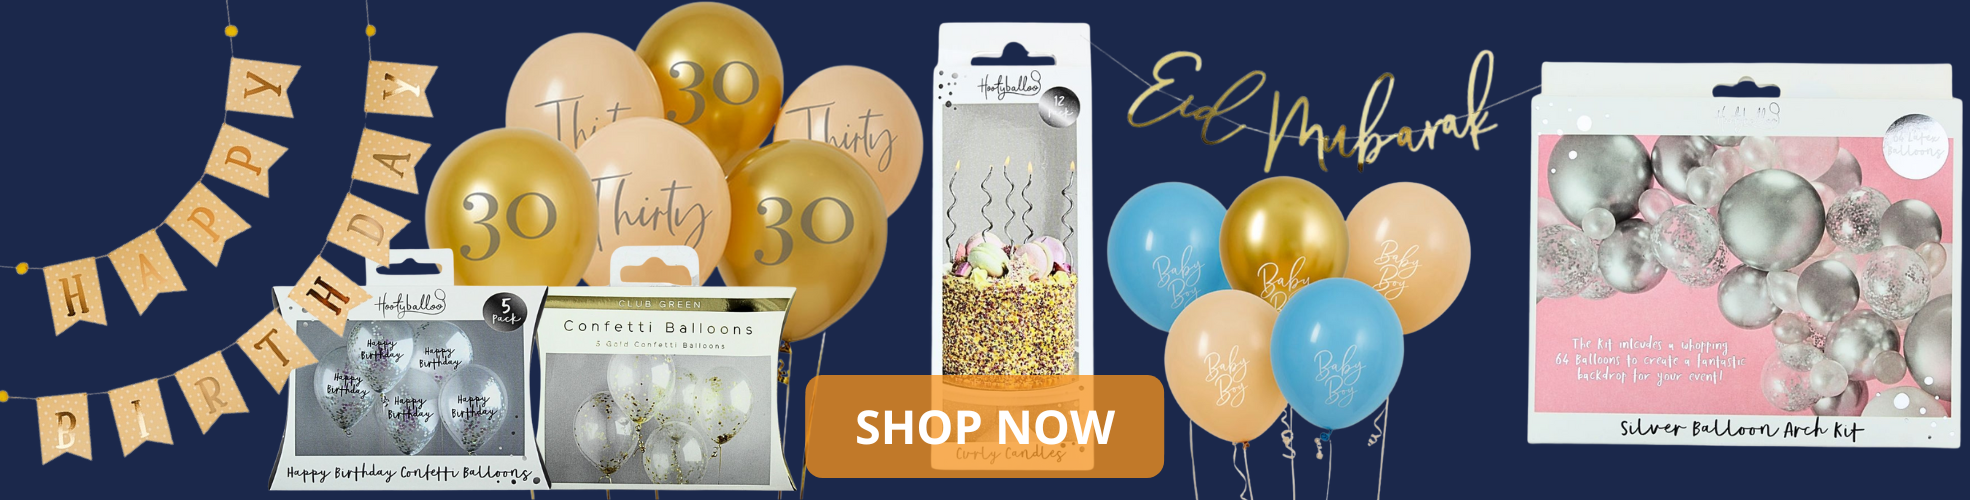 Browse the new additions to our range of party supplies for anniversary, baby shower, birthday, bridal shower, eid, mother's day, father's day and many other occasions.